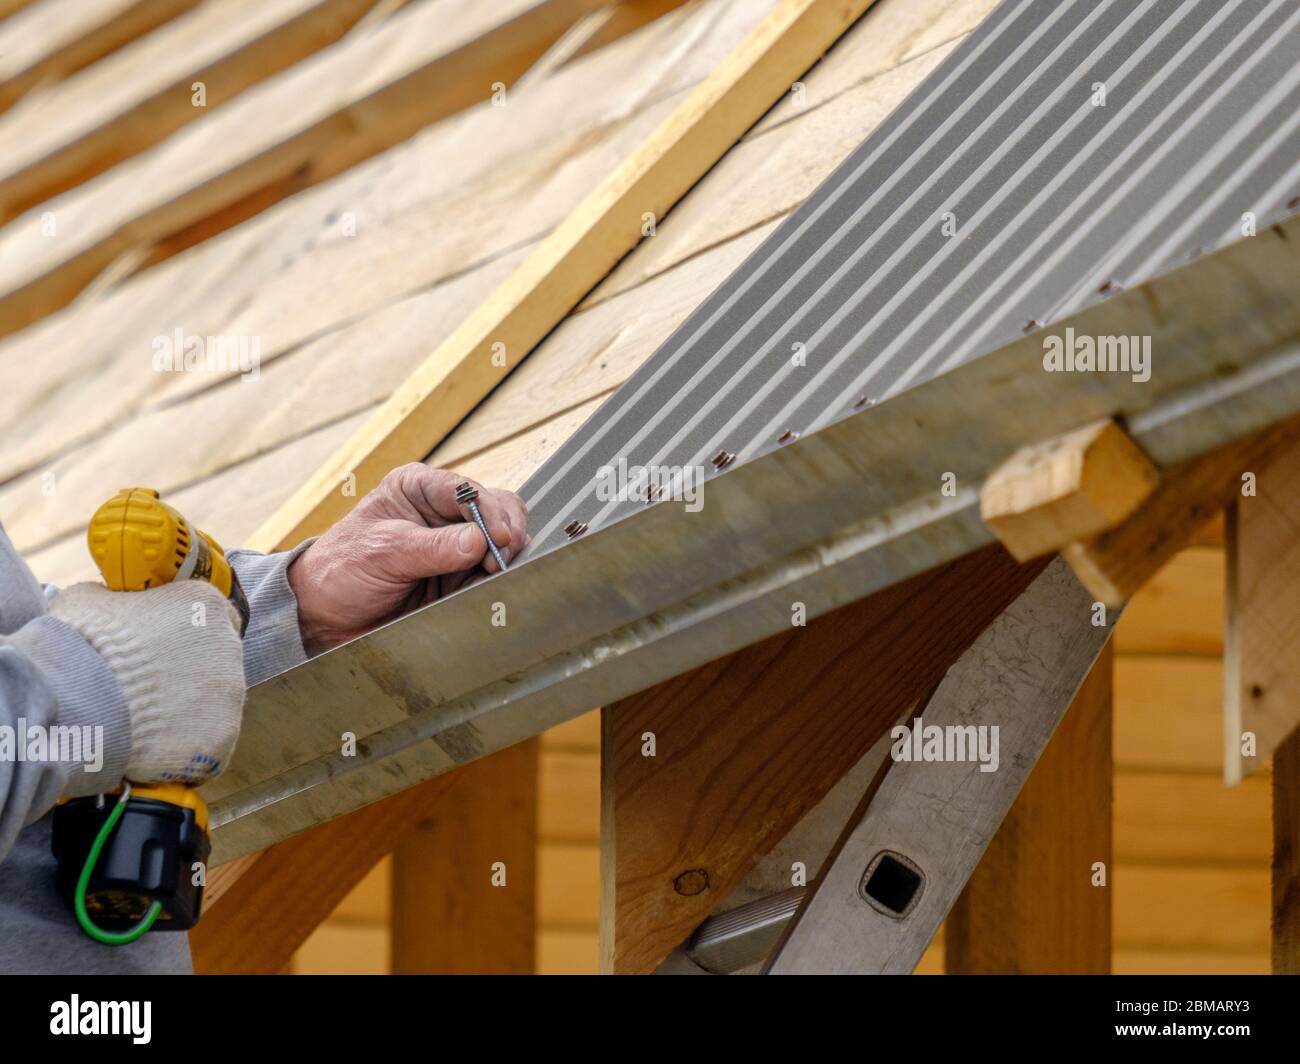 https://c8.alamy.com/comp/2BMARY3/mens-hands-in-work-gloves-with-a-yellow-screwdriver-screw-the-roofing-sheet-to-the-roof-of-a-country-house-cordless-drill-2BMARY3.jpg